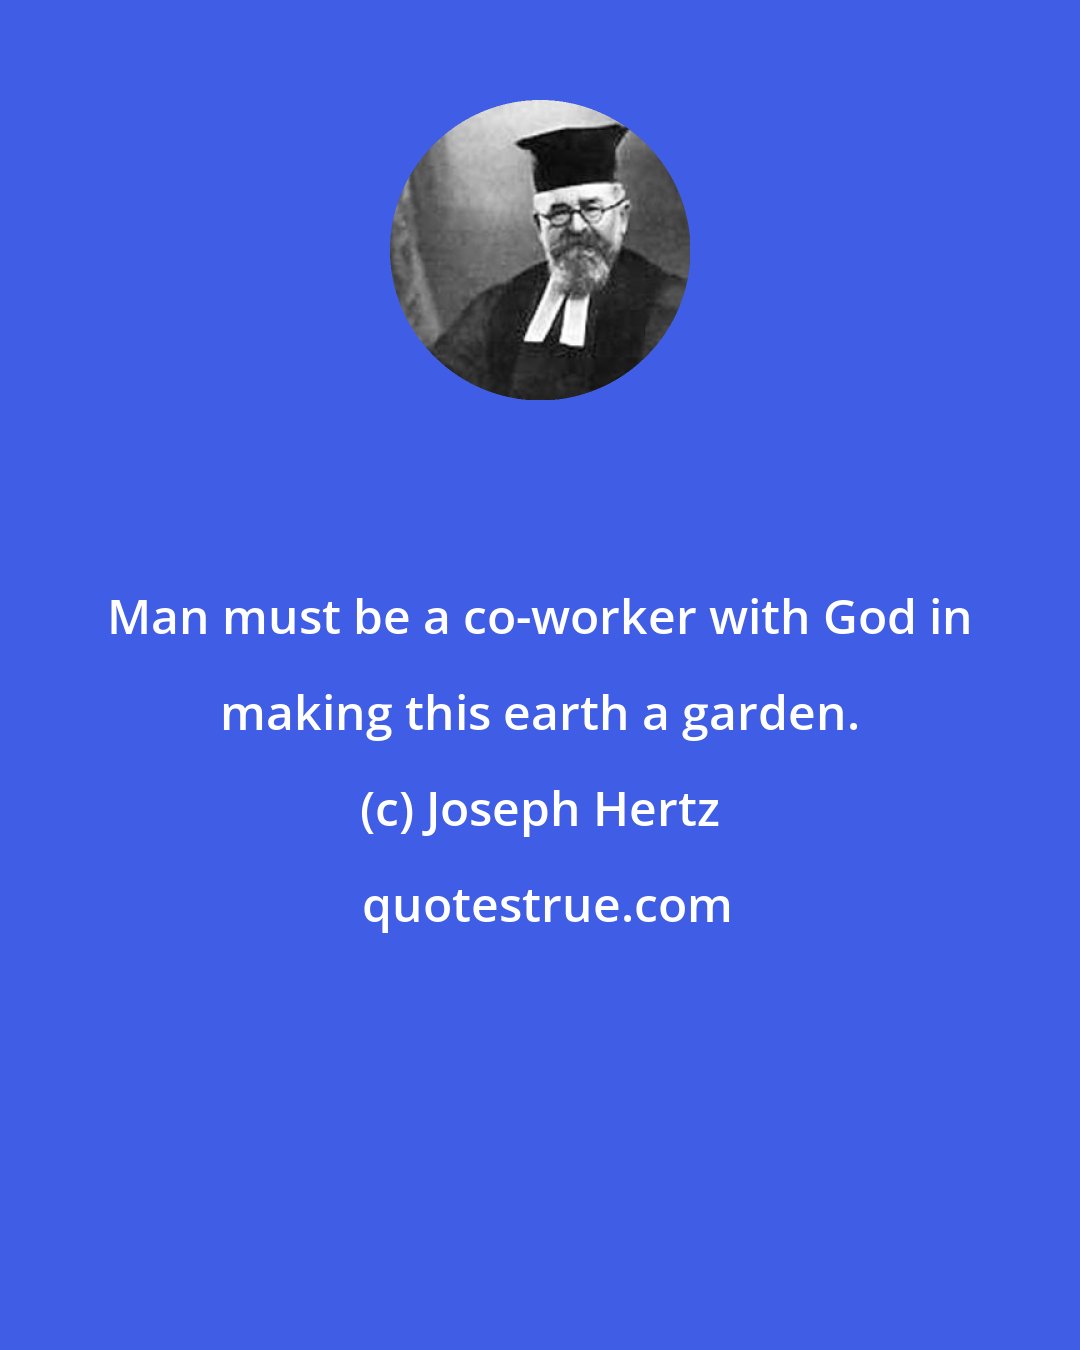 Joseph Hertz: Man must be a co-worker with God in making this earth a garden.